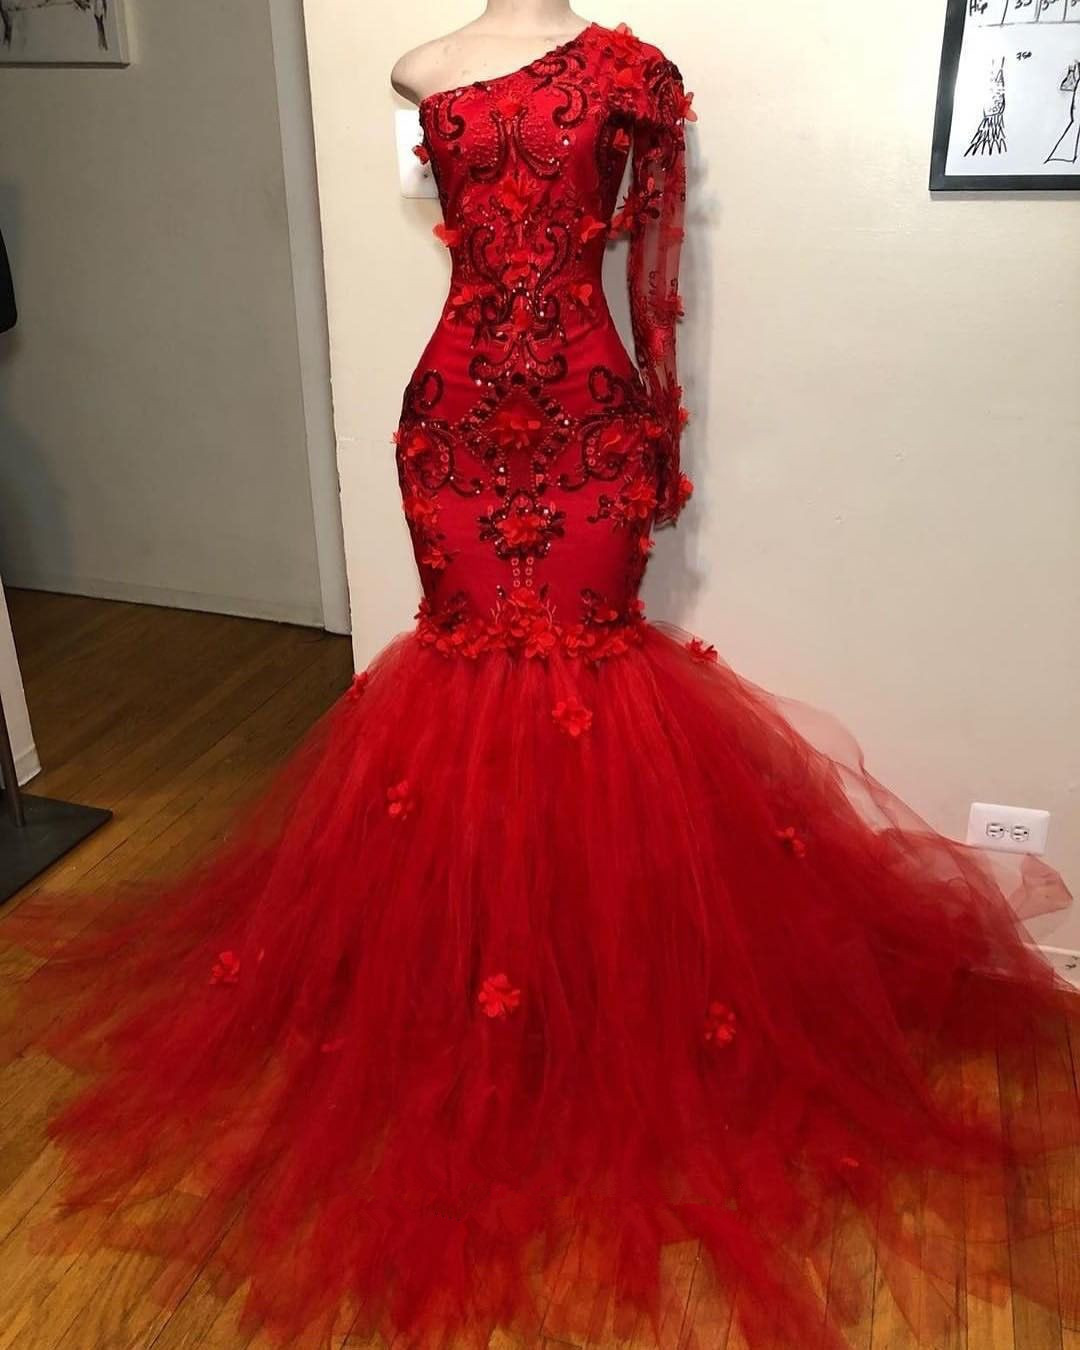 P3612 One Shoulder Mermaid Red Prom Dress,tulle Beaded Prom Dresses,red Evening Dresses,